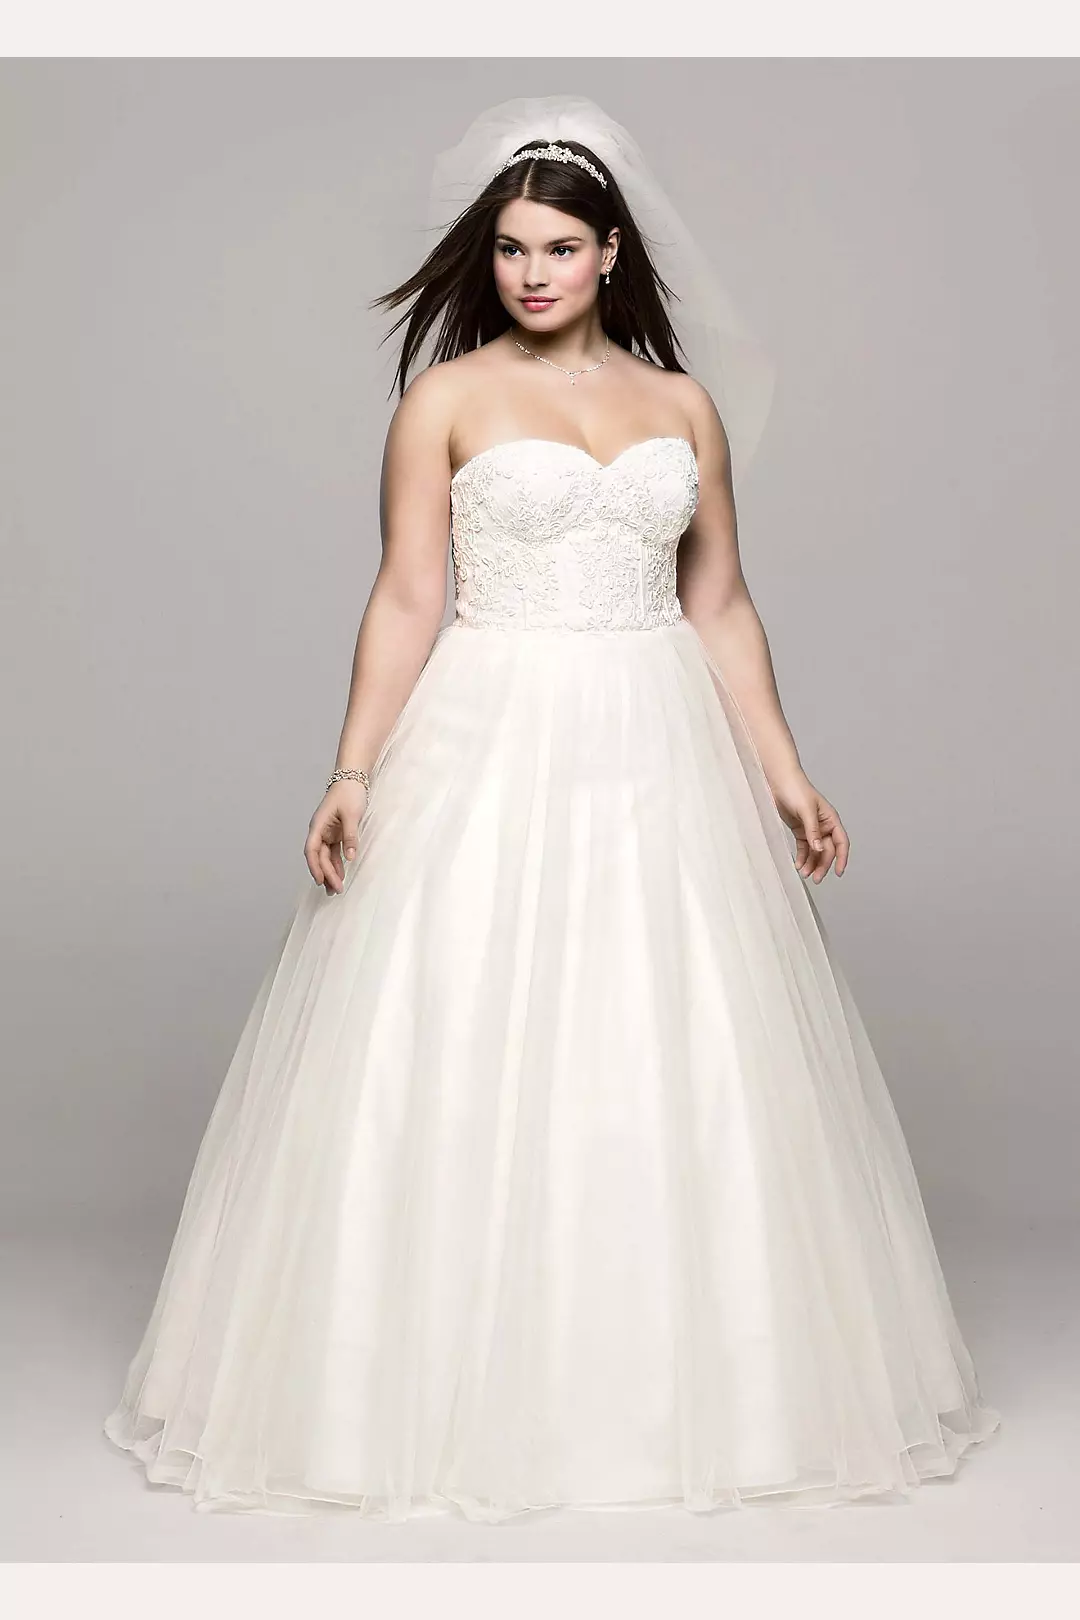 Plus Size Wedding Dress with Corset Back,A-line Tulle Wedding Gown,WD0 -  Wishingdress